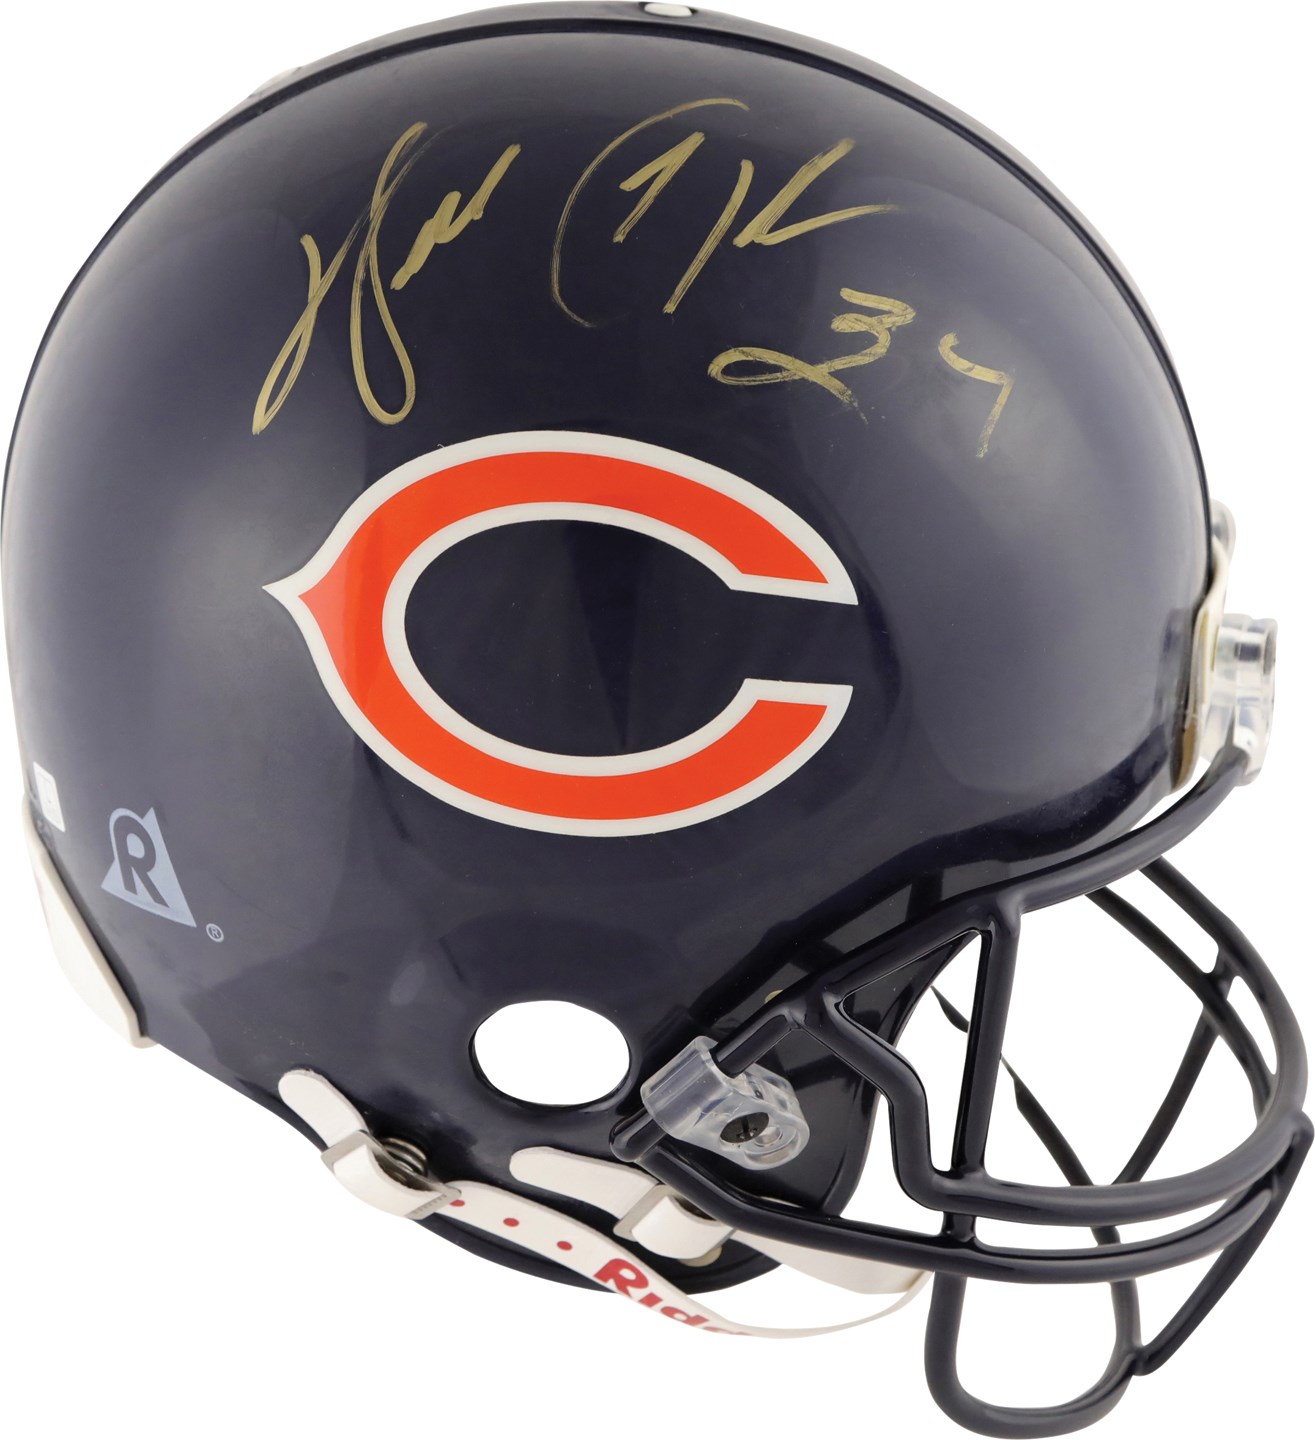 Football - Rare 1999 Walter Payton Twice-Signed Chicago Bears Full Sized Helmet with Exact Proof of Signing! (PSA)